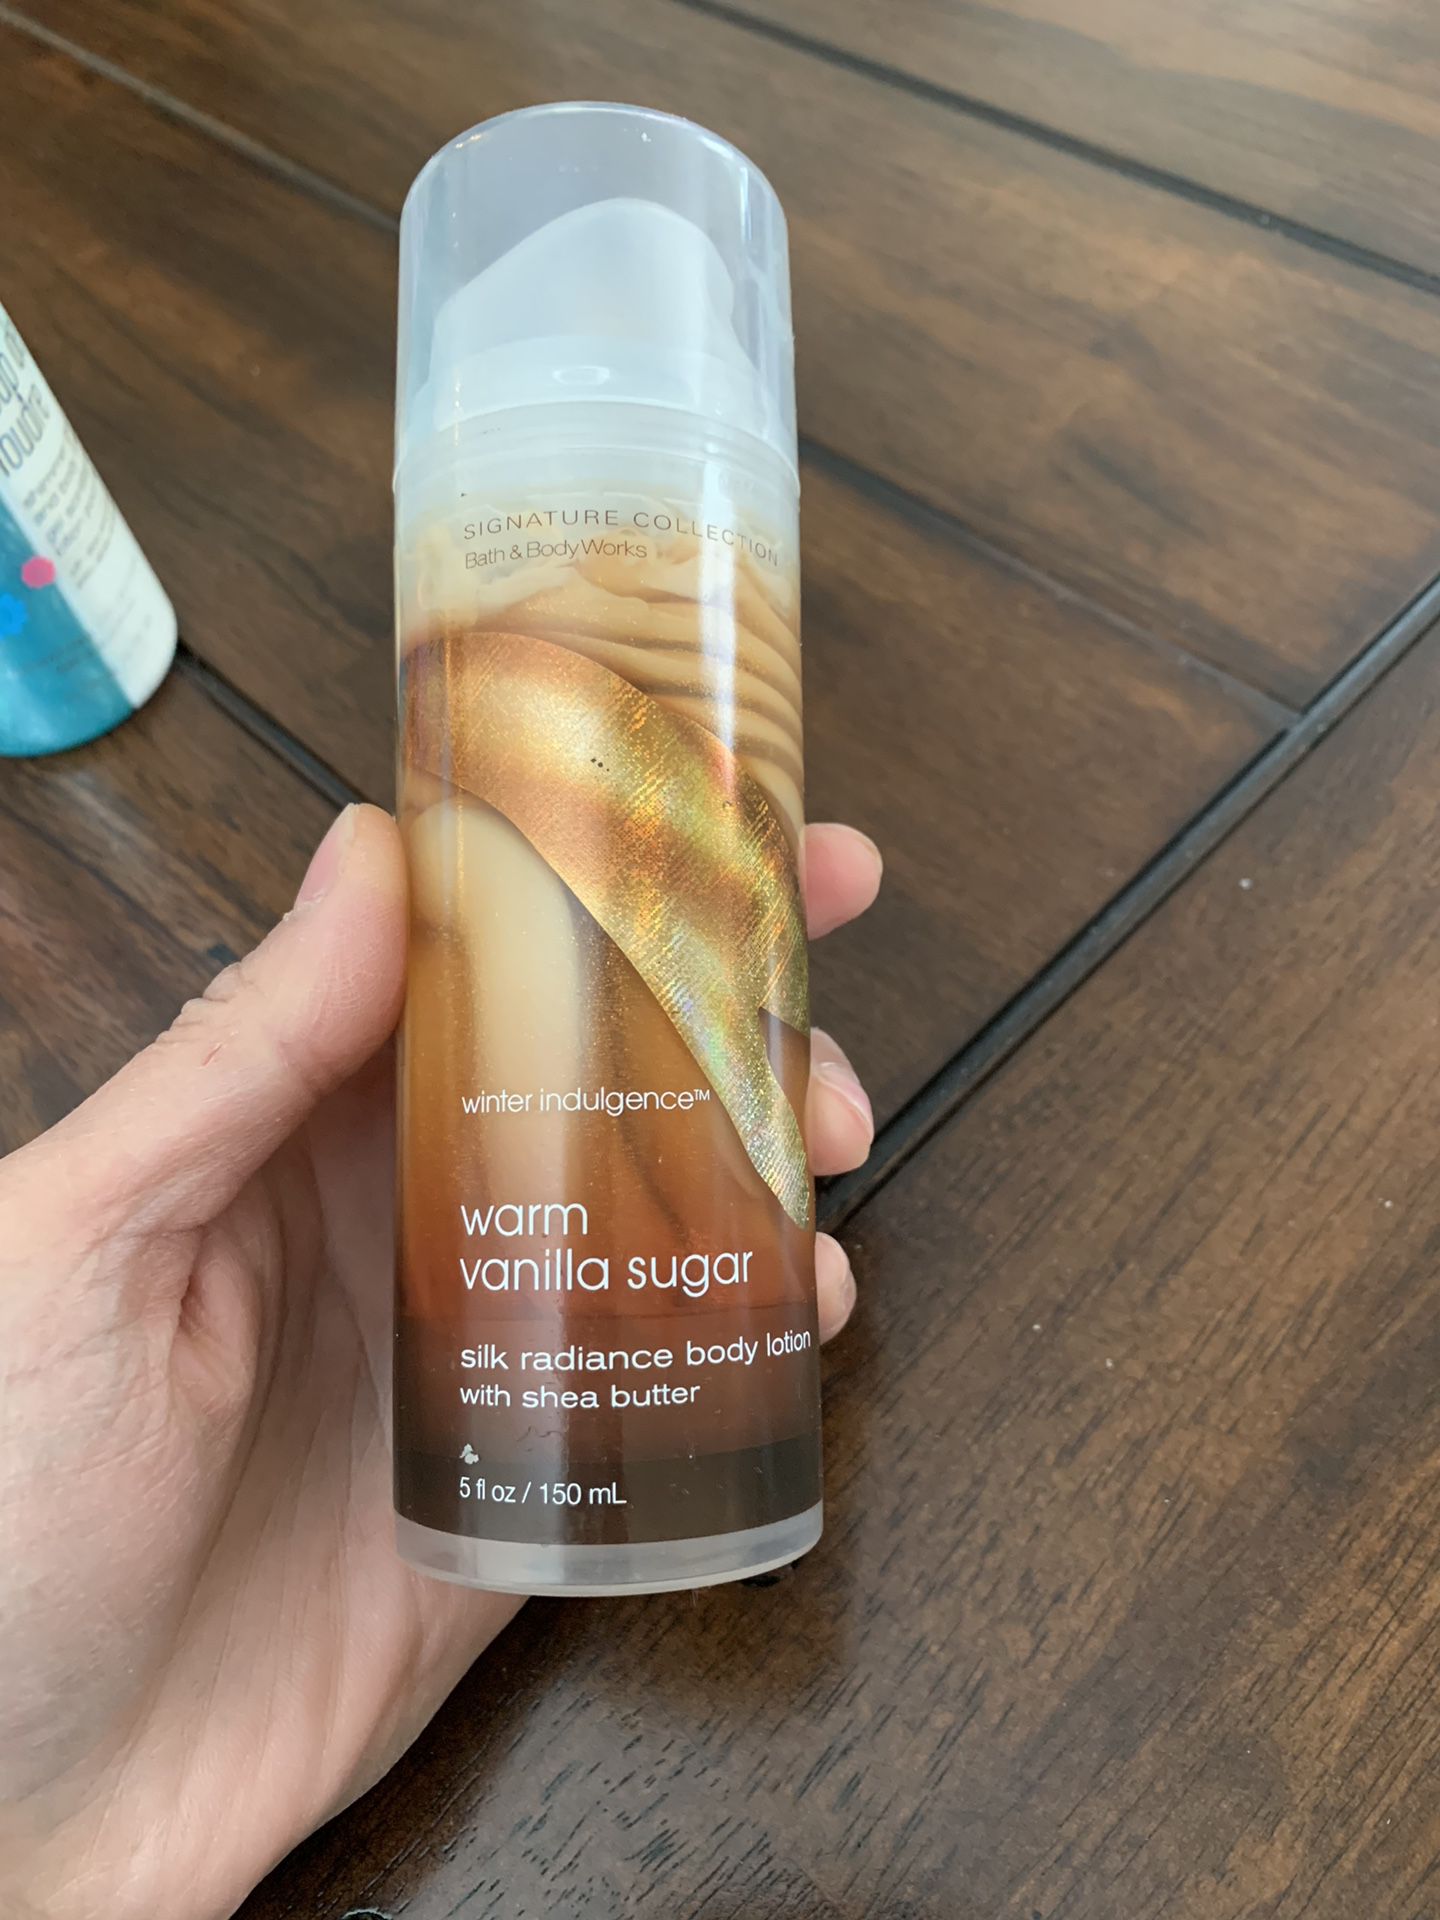 Cactus Blossom - Bath & Body Works - Body Lotion for Sale in Melrose Park,  IL - OfferUp